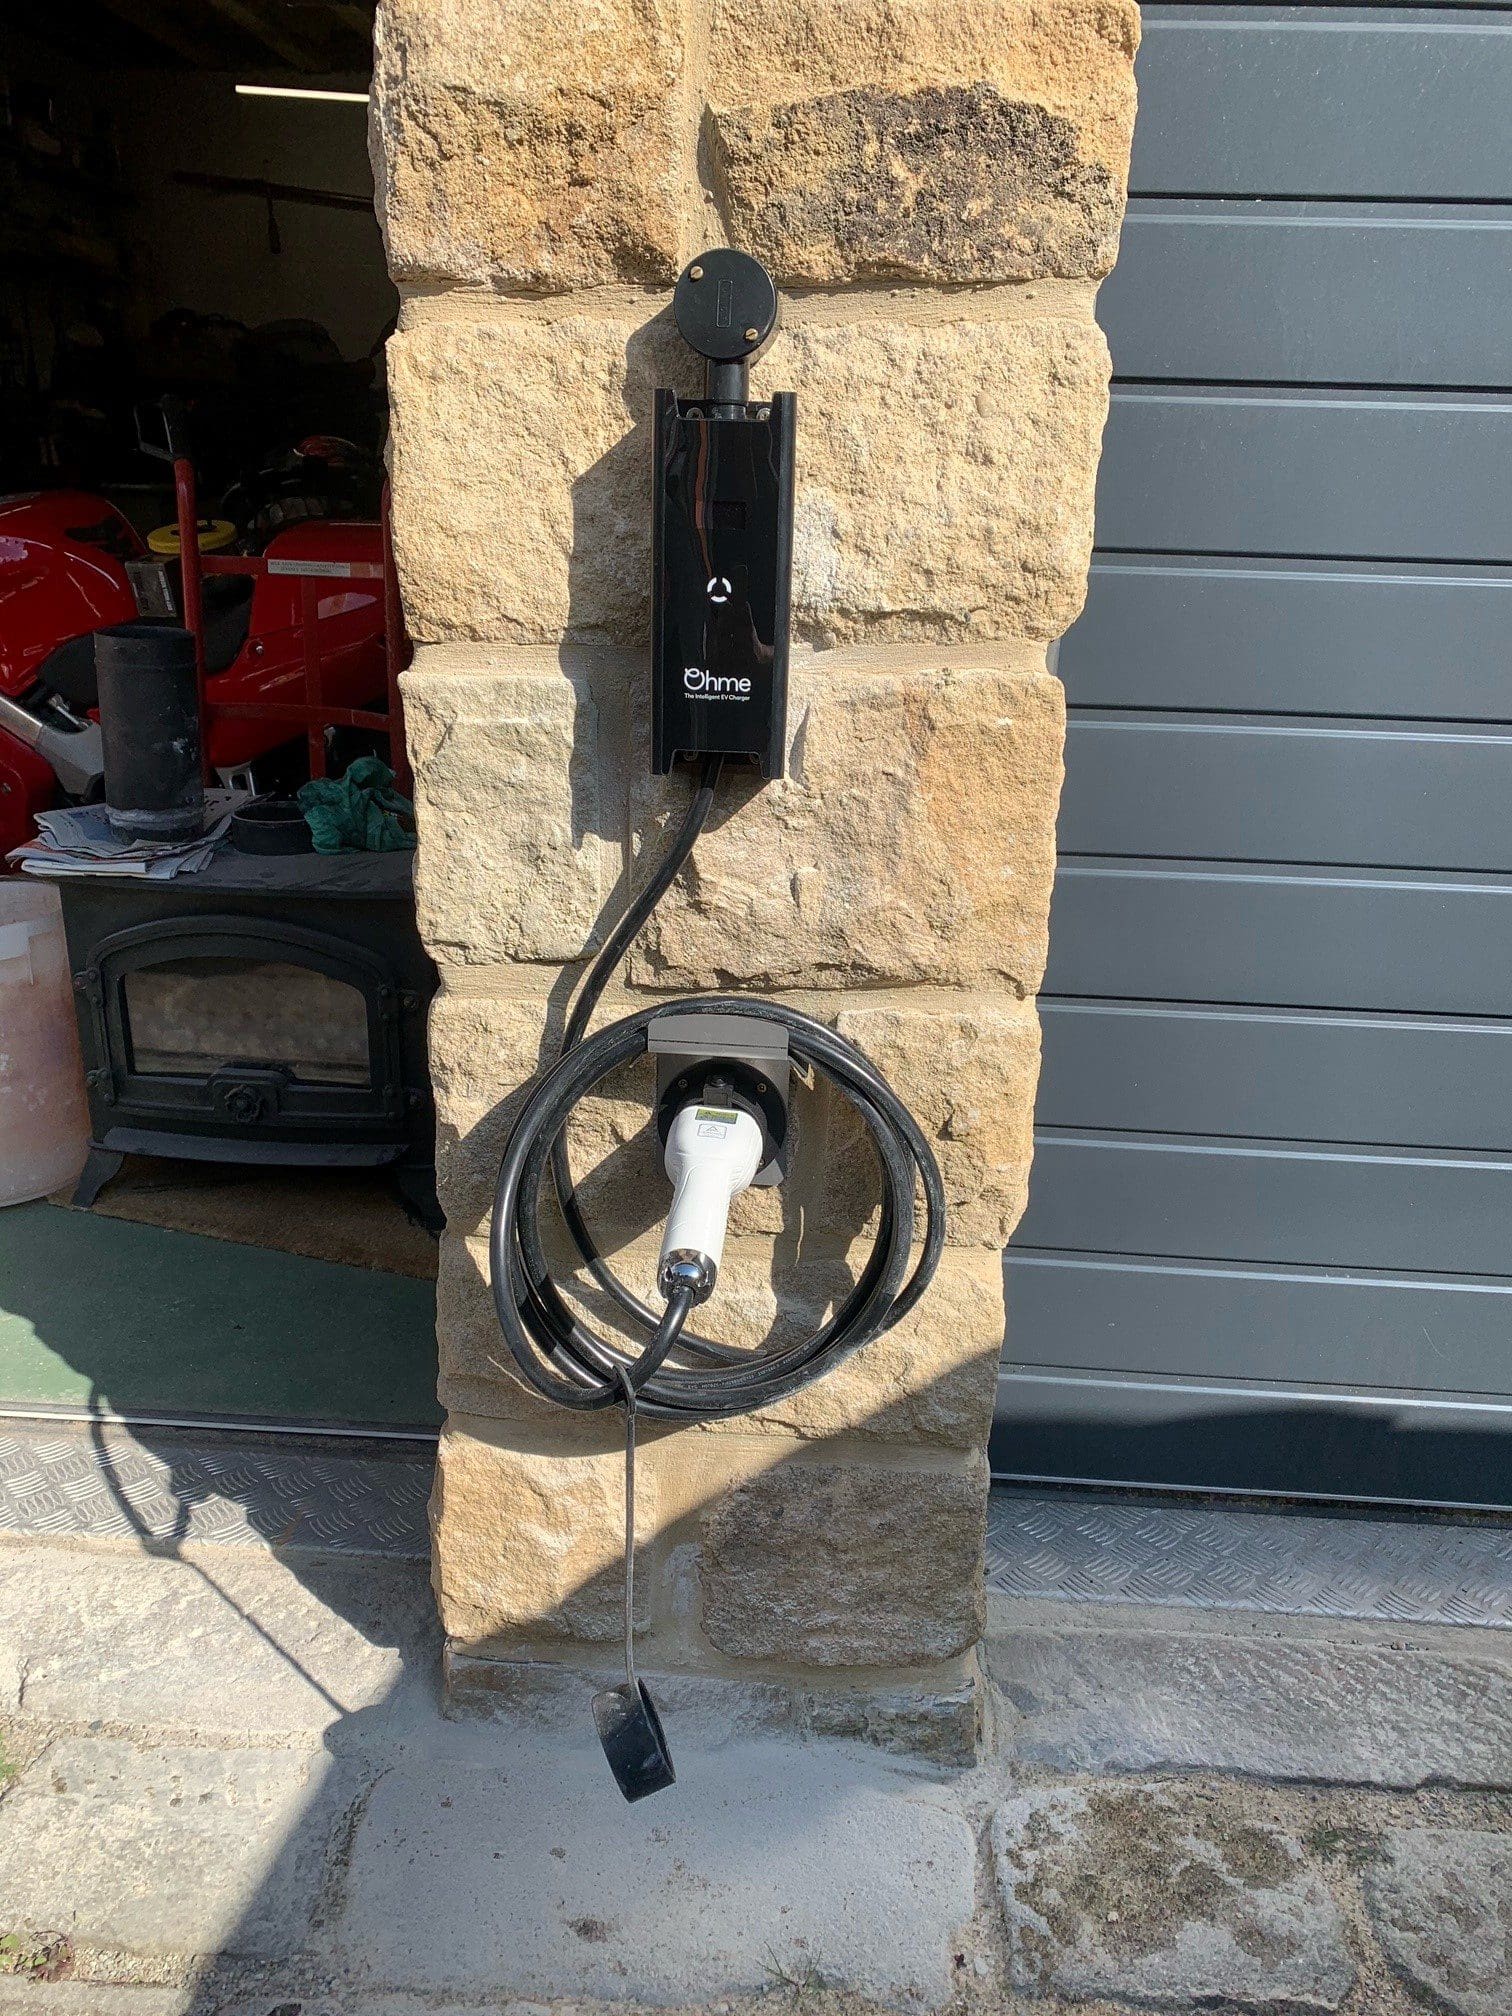 EV Charger Installers Wetherby